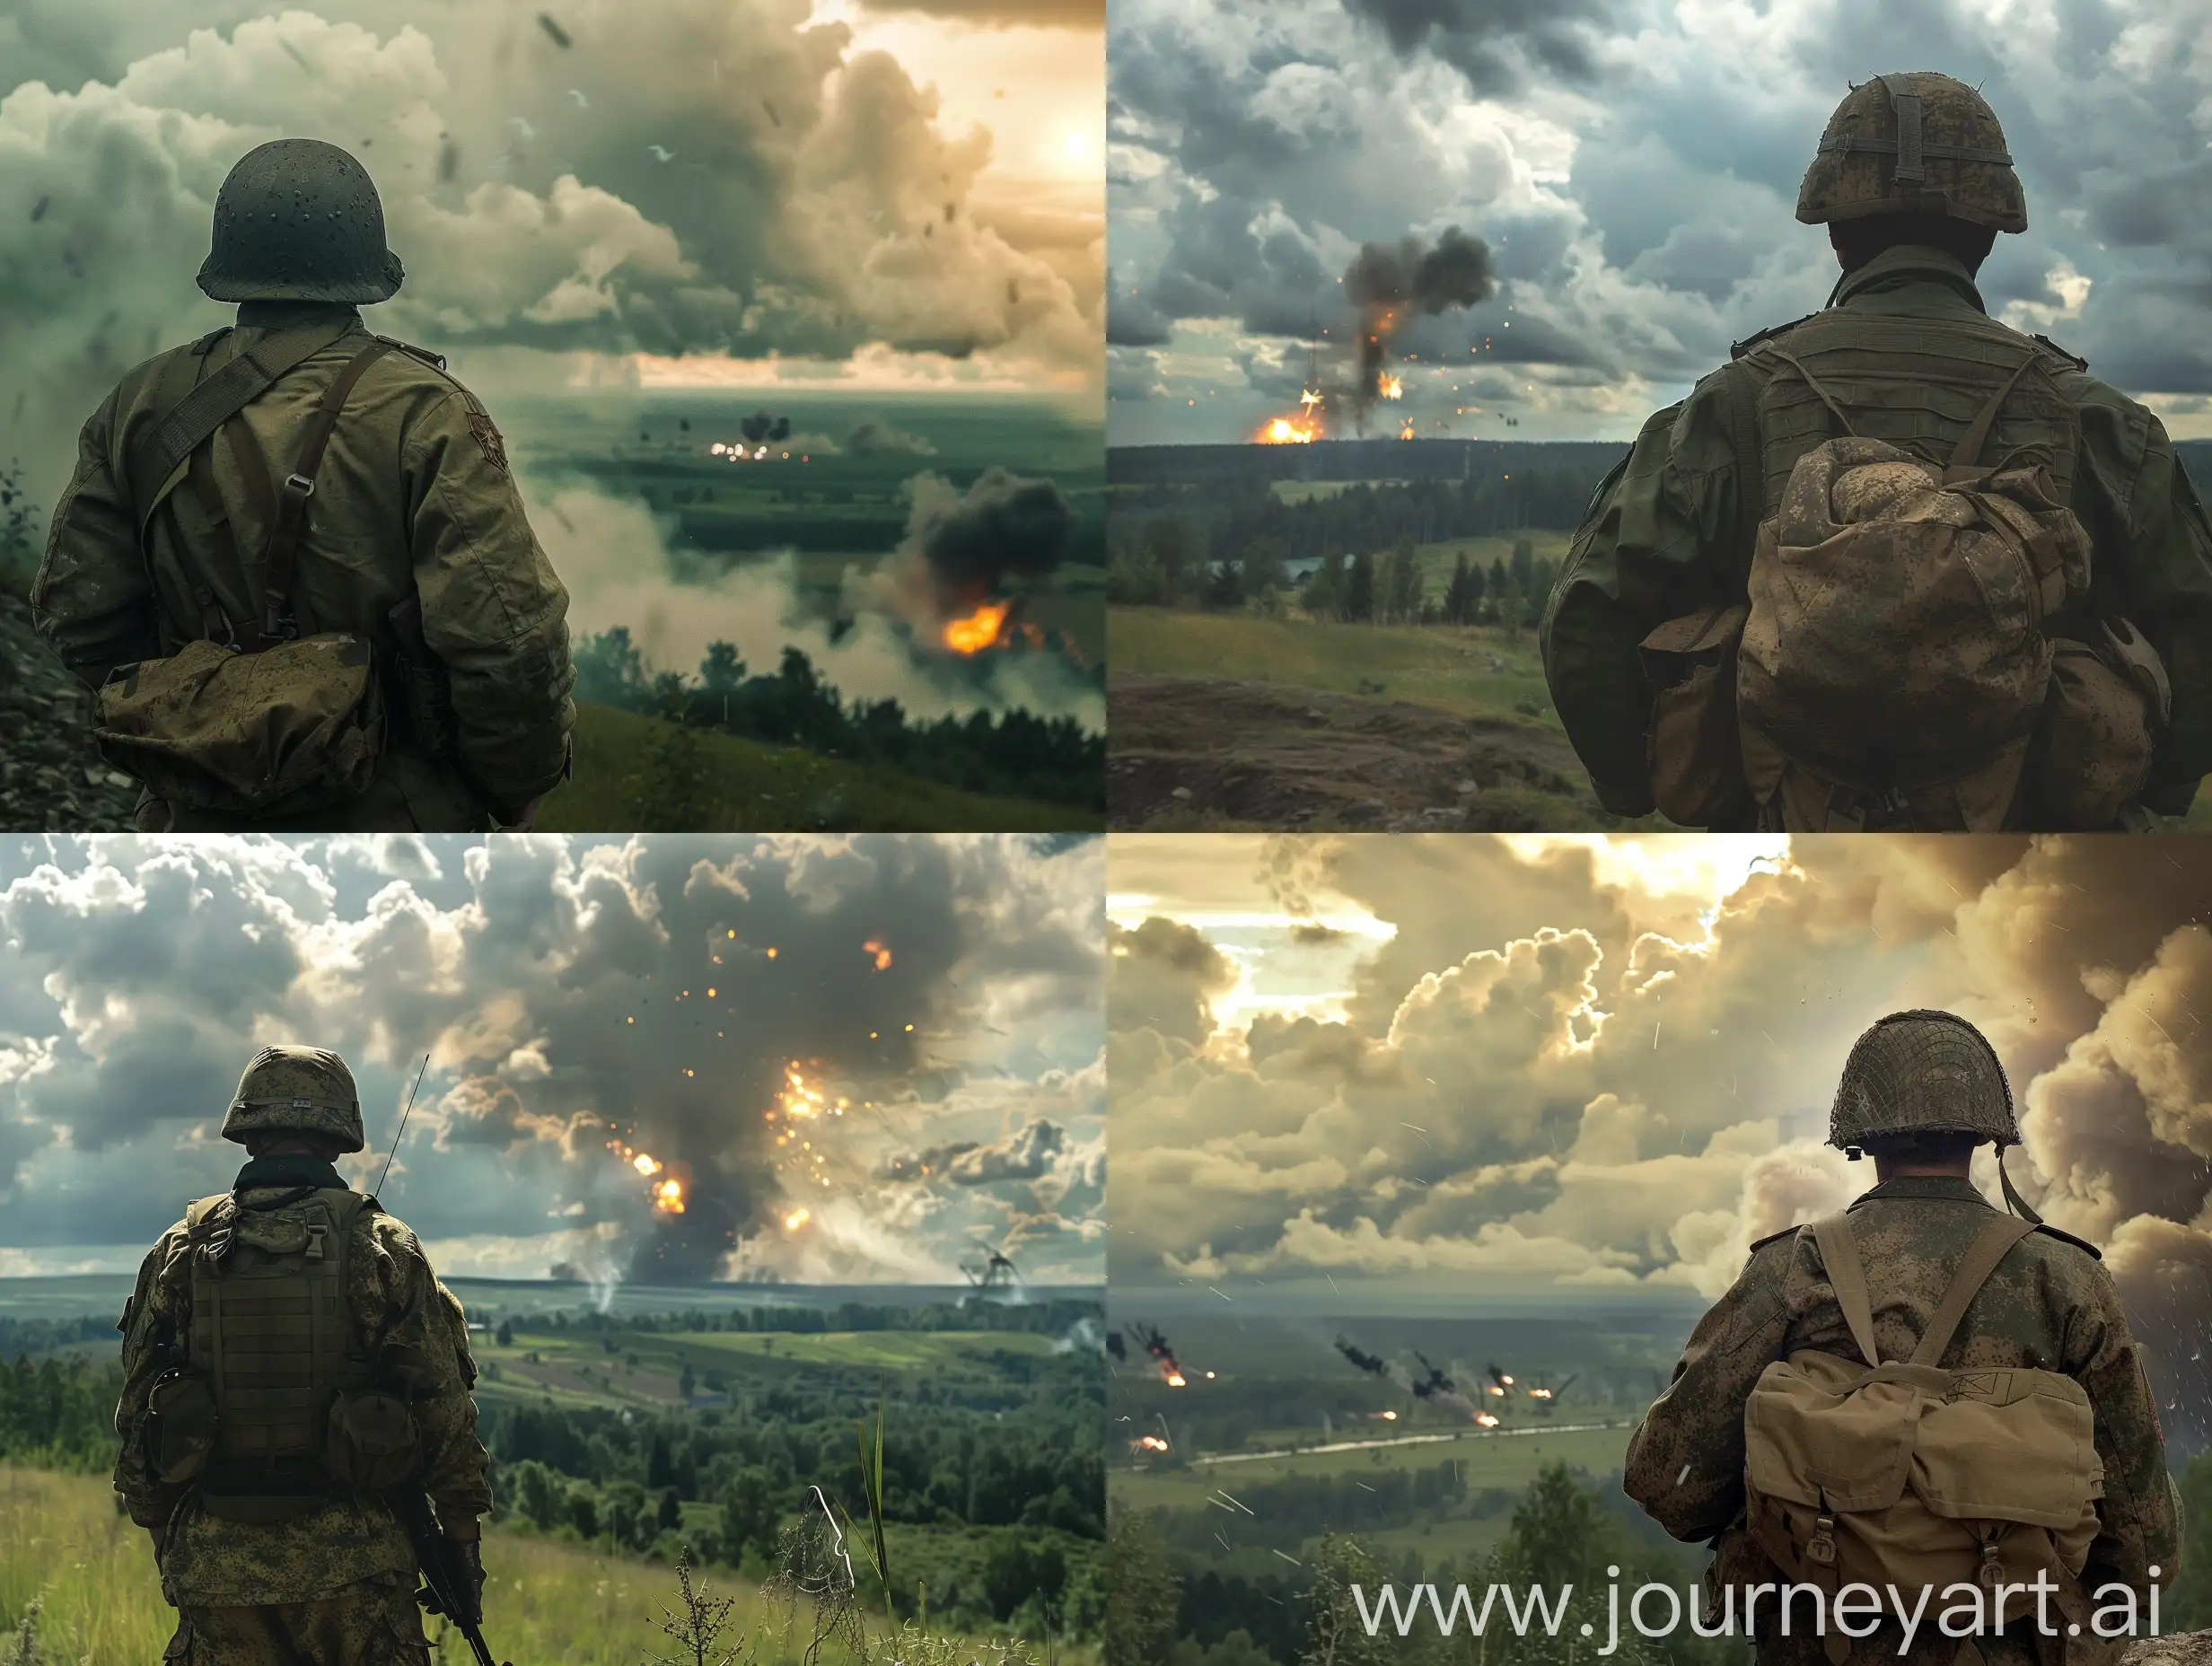 Russian-Soldier-Standing-in-Green-Clearing-Amid-Impending-Explosions